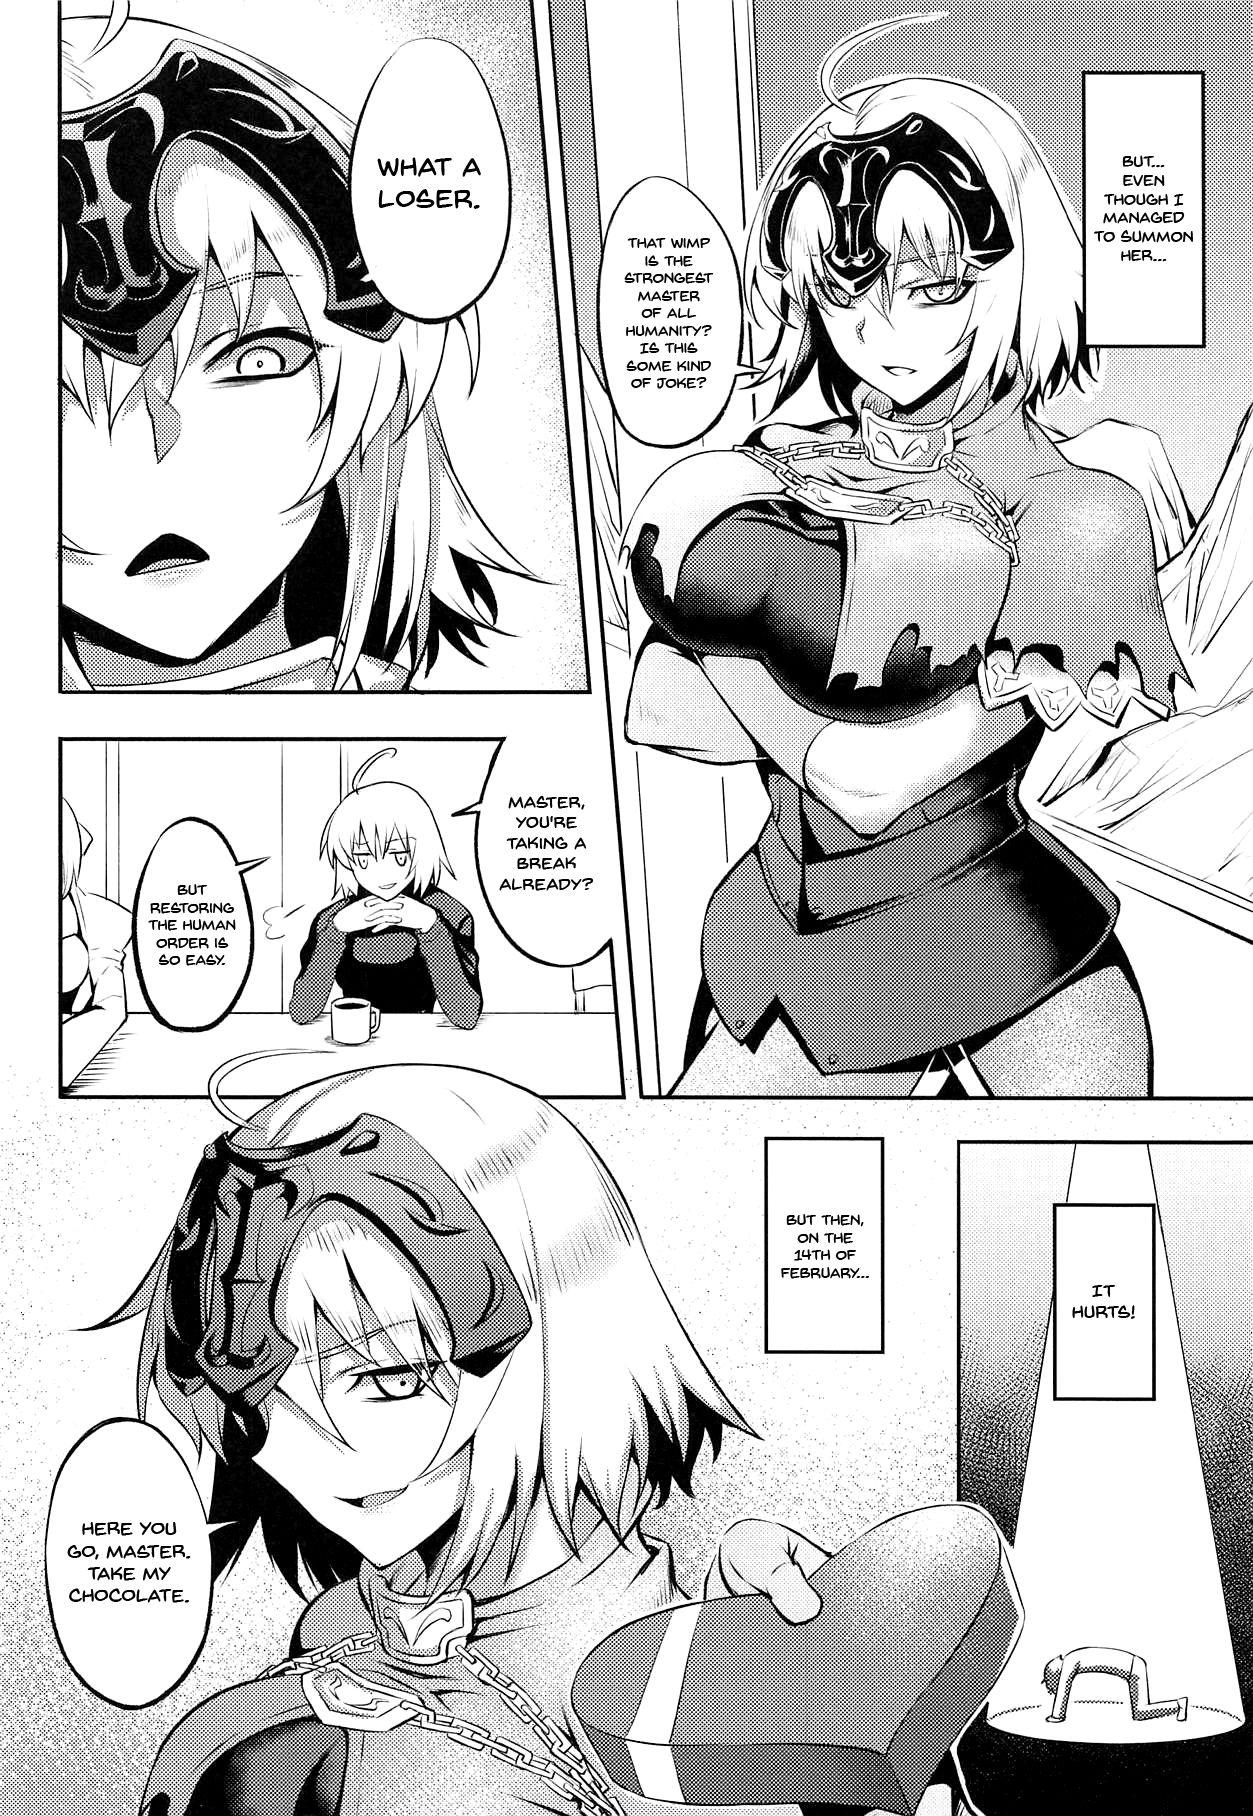 Cut Sugao no Mama no Kimi de Ite | Together With You Showing Her True Face - Fate grand order Foreplay - Page 4